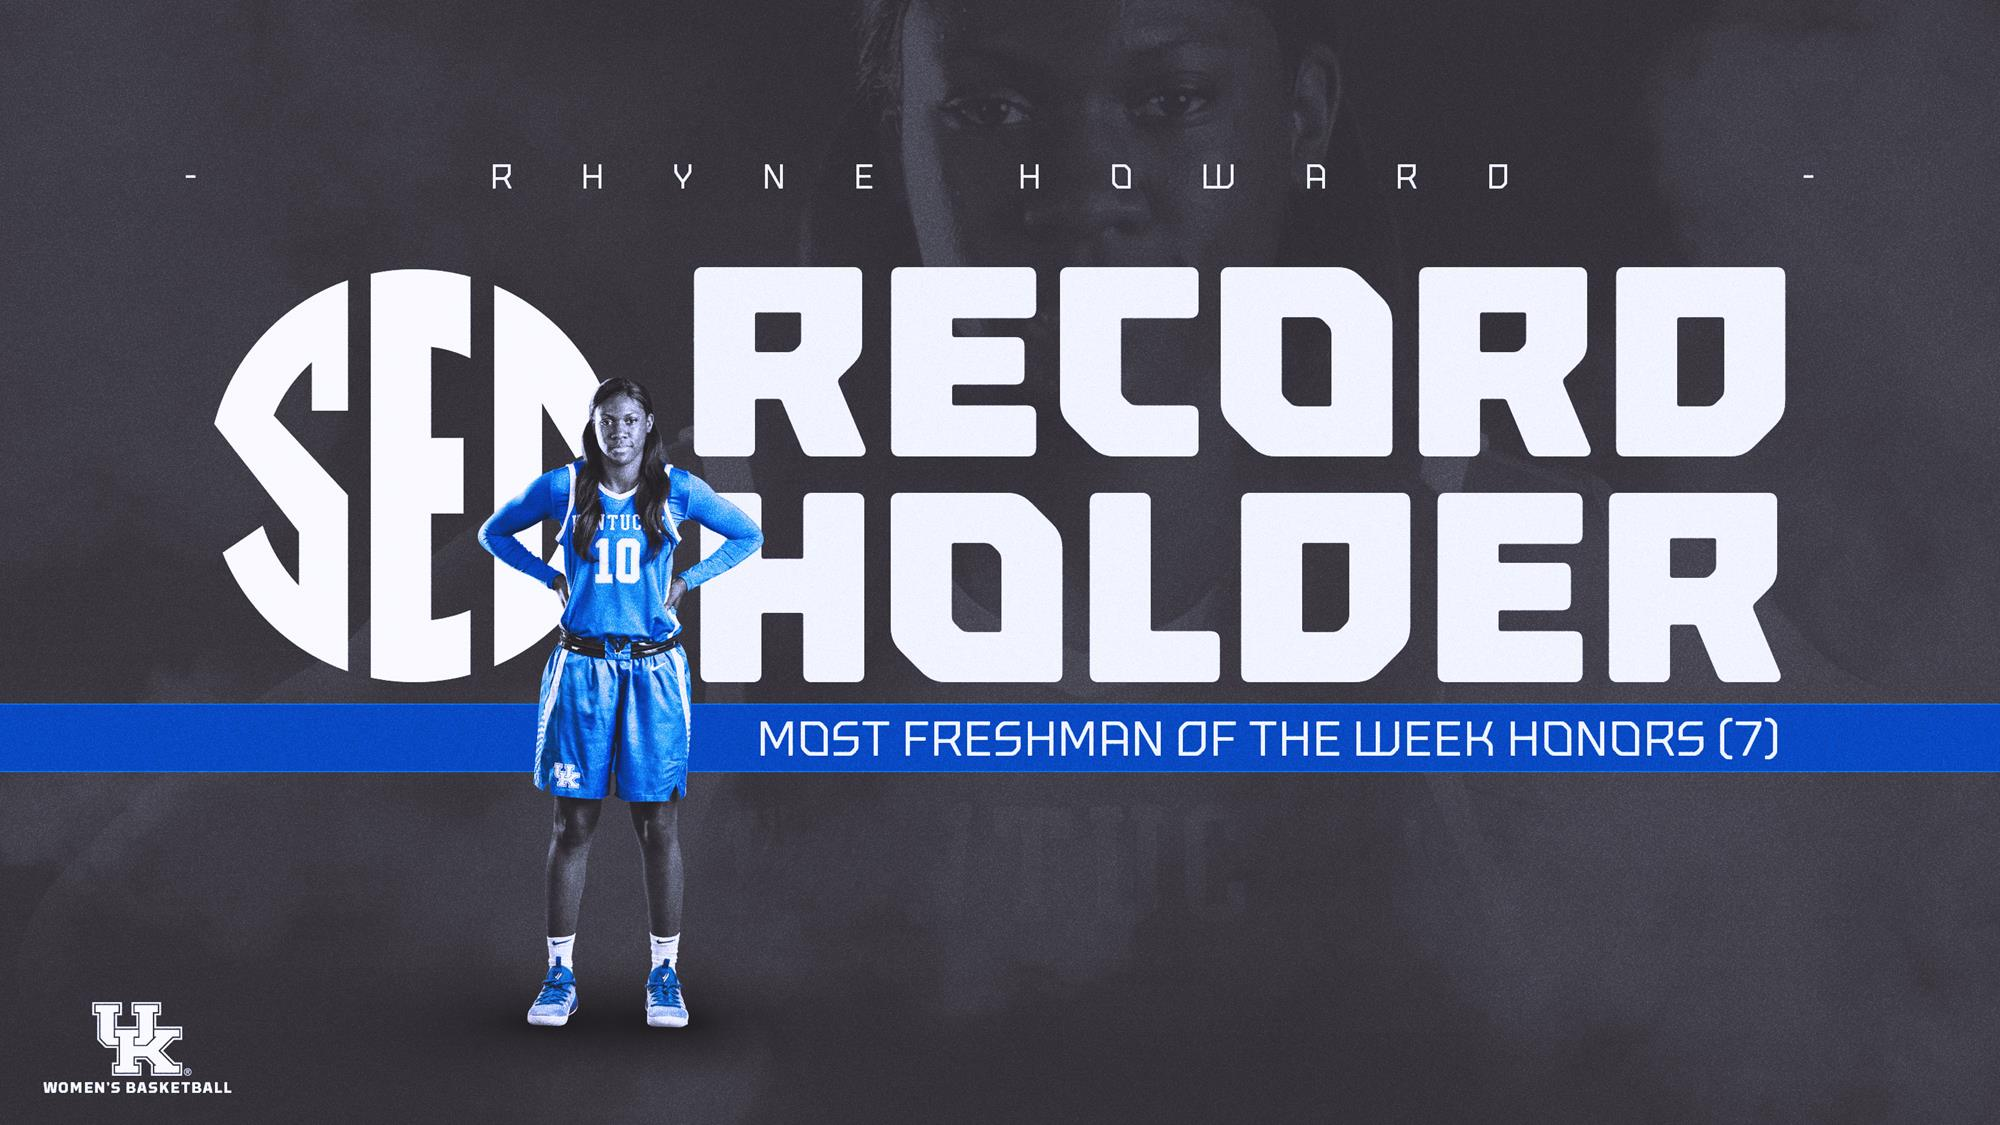 Howard Sets SEC Record With 7th Freshman of the Week Honor